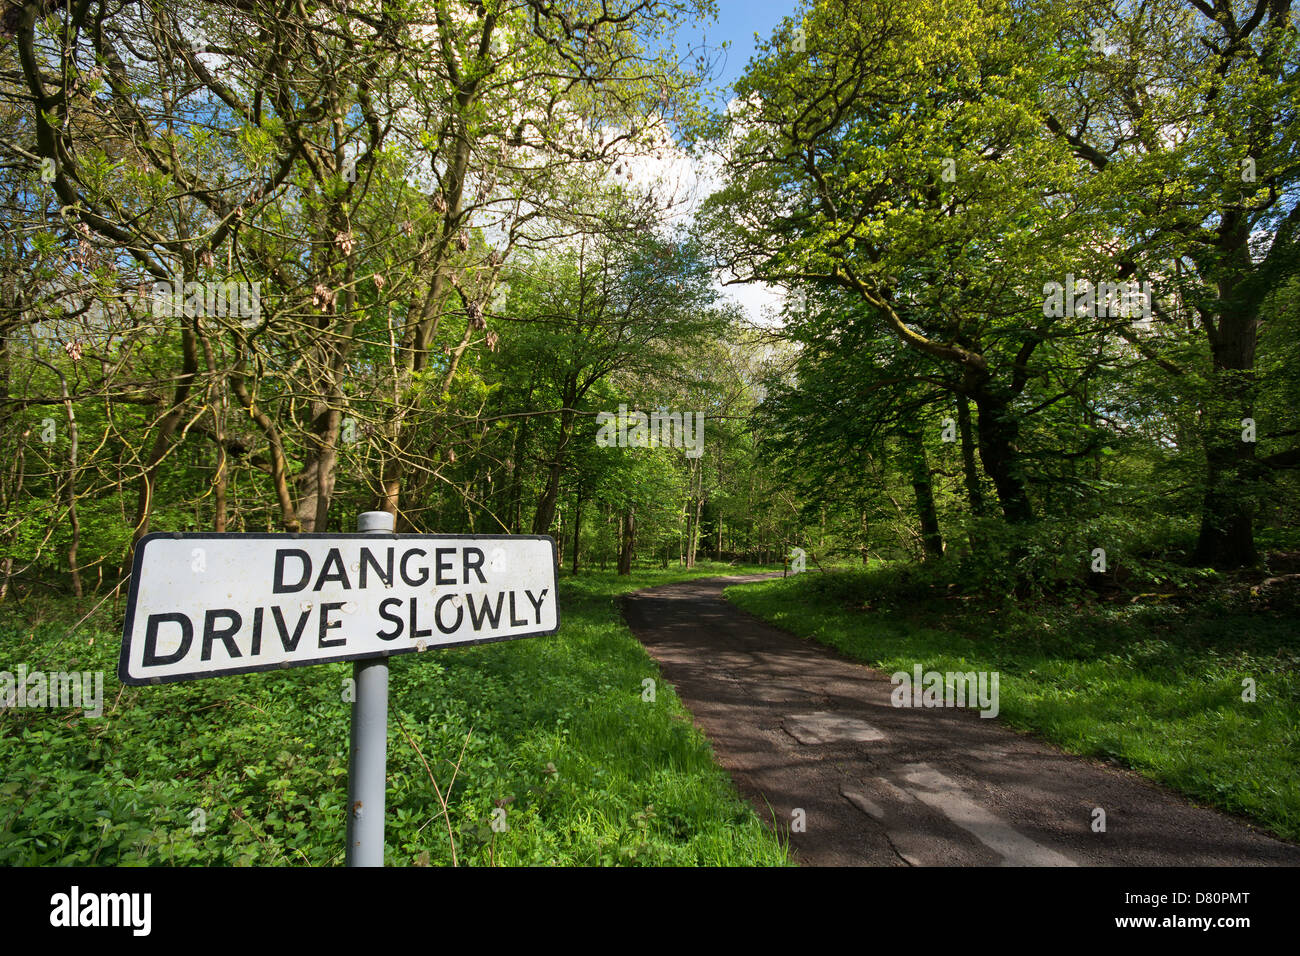 A sign warning motorists to drive slowly on a narrow country lane. UK, 2013. Stock Photo